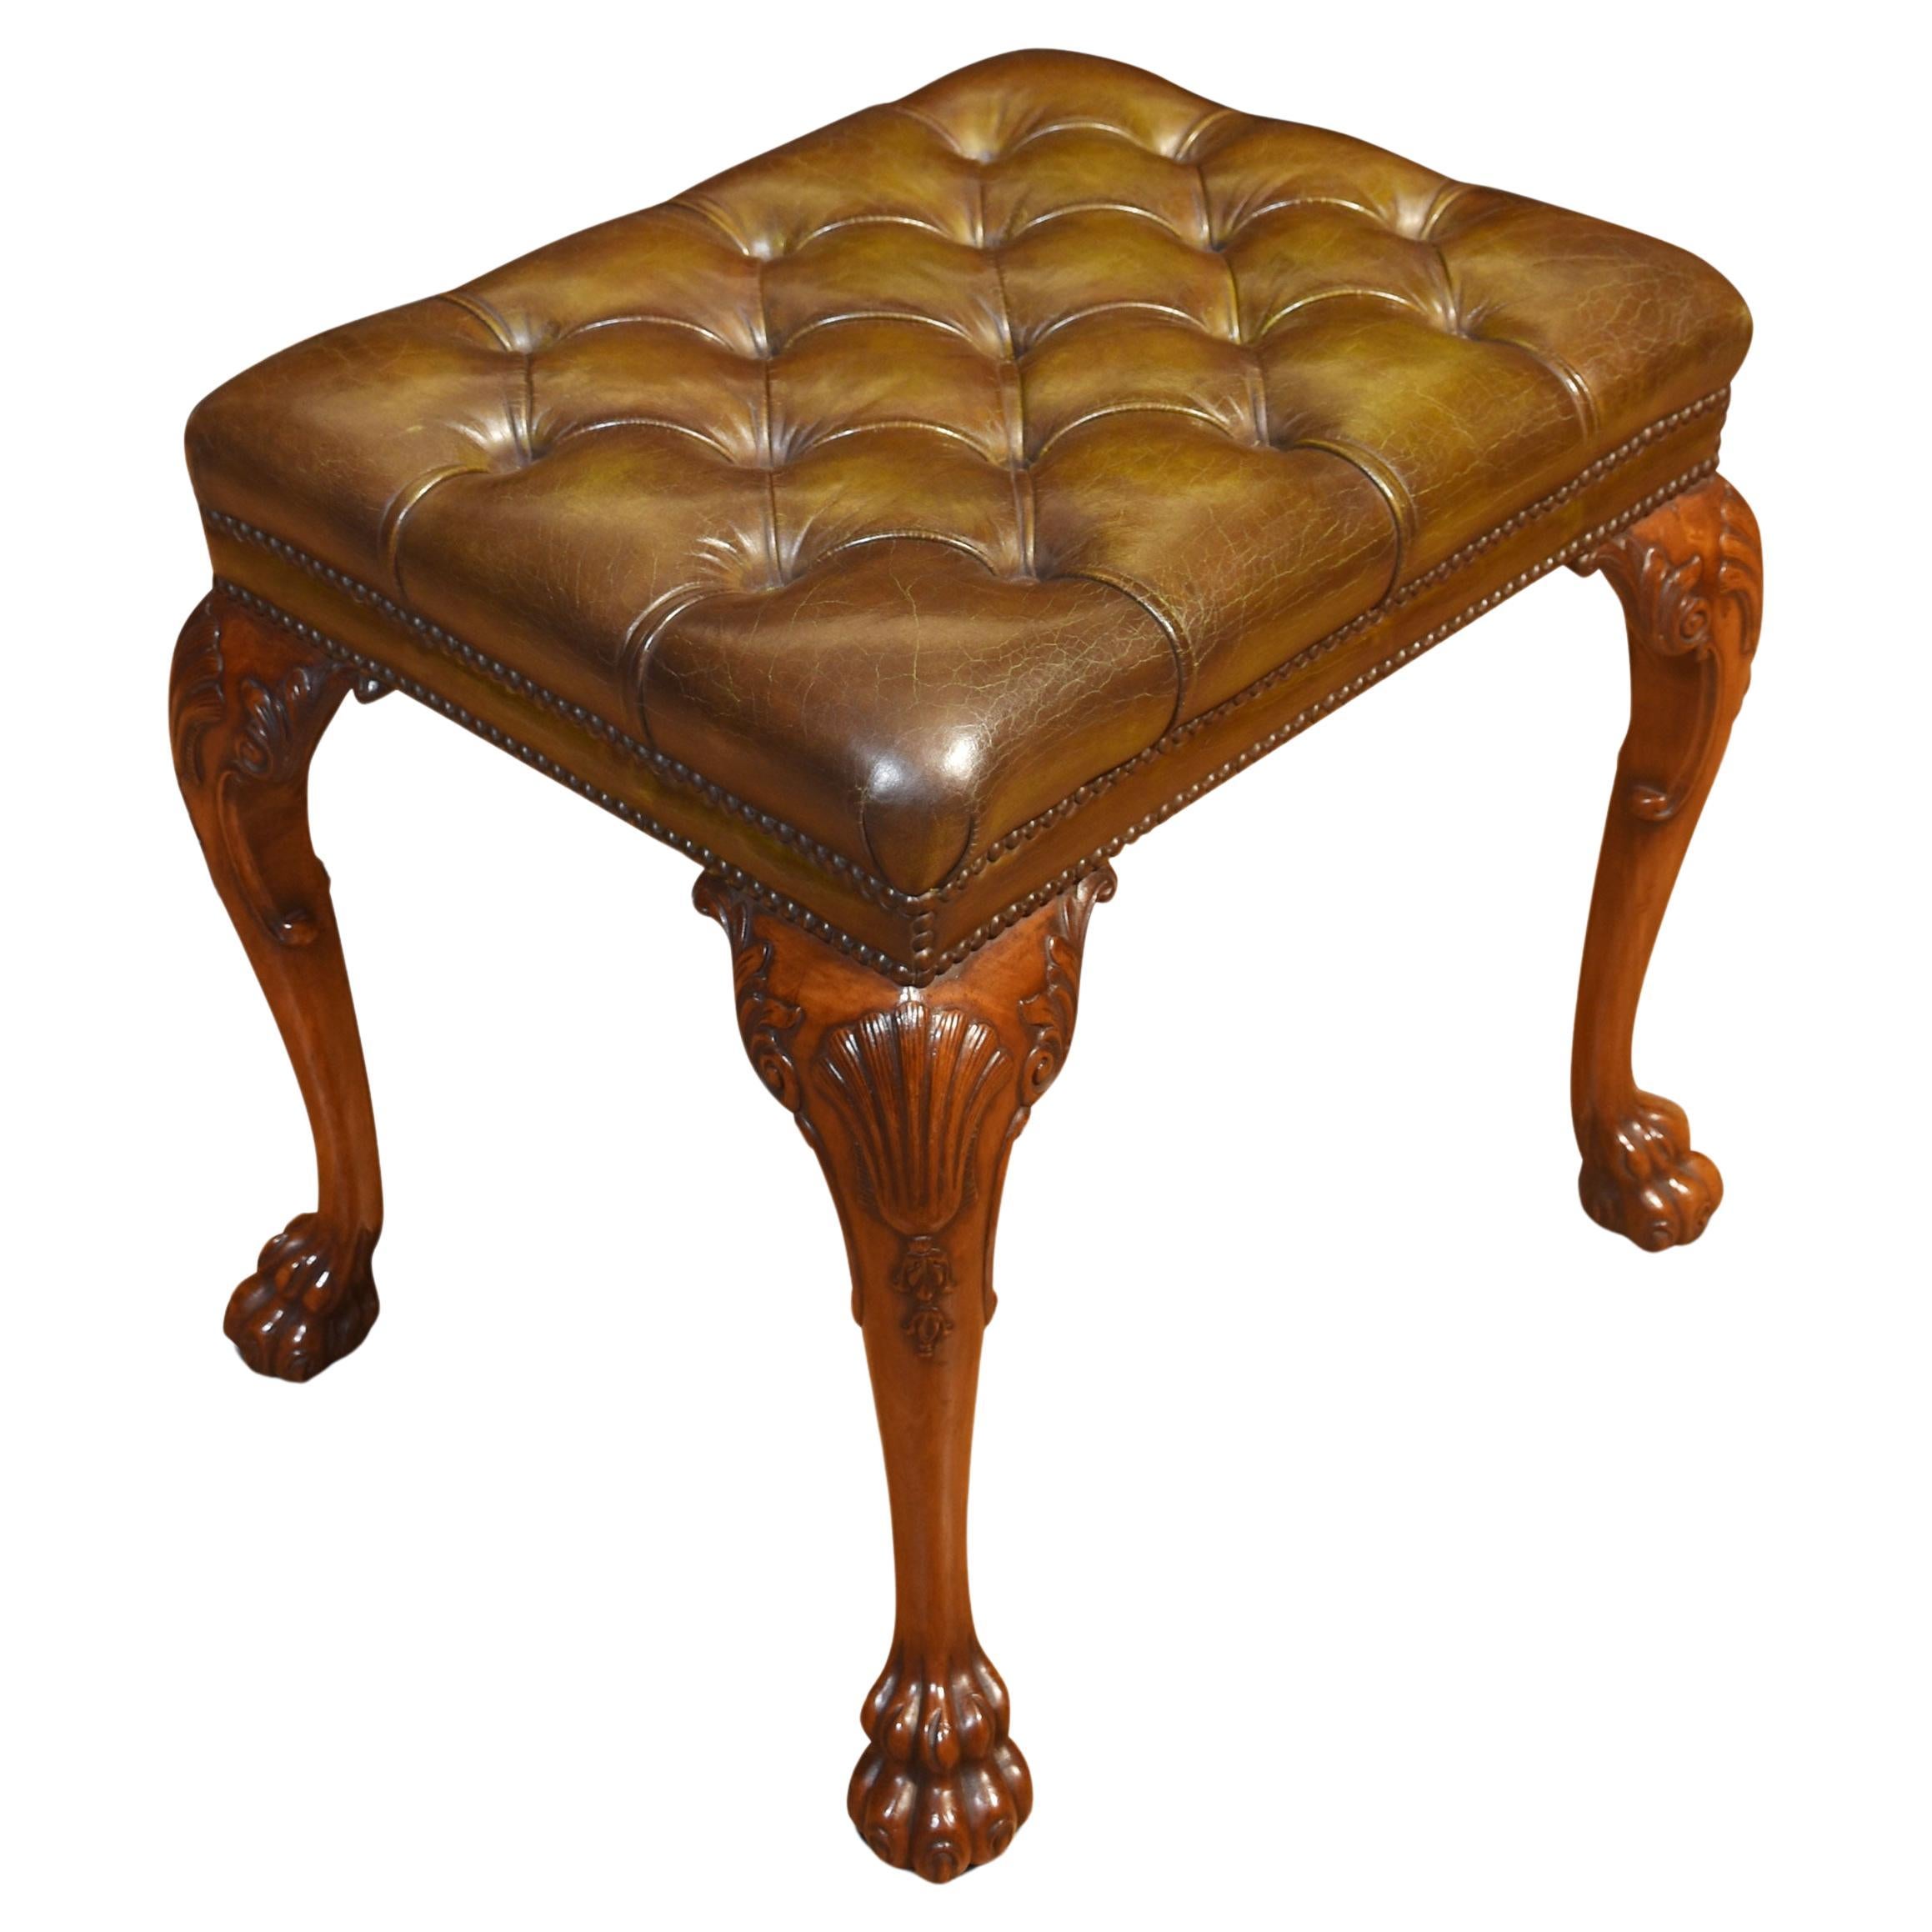 Leather upholstered stool